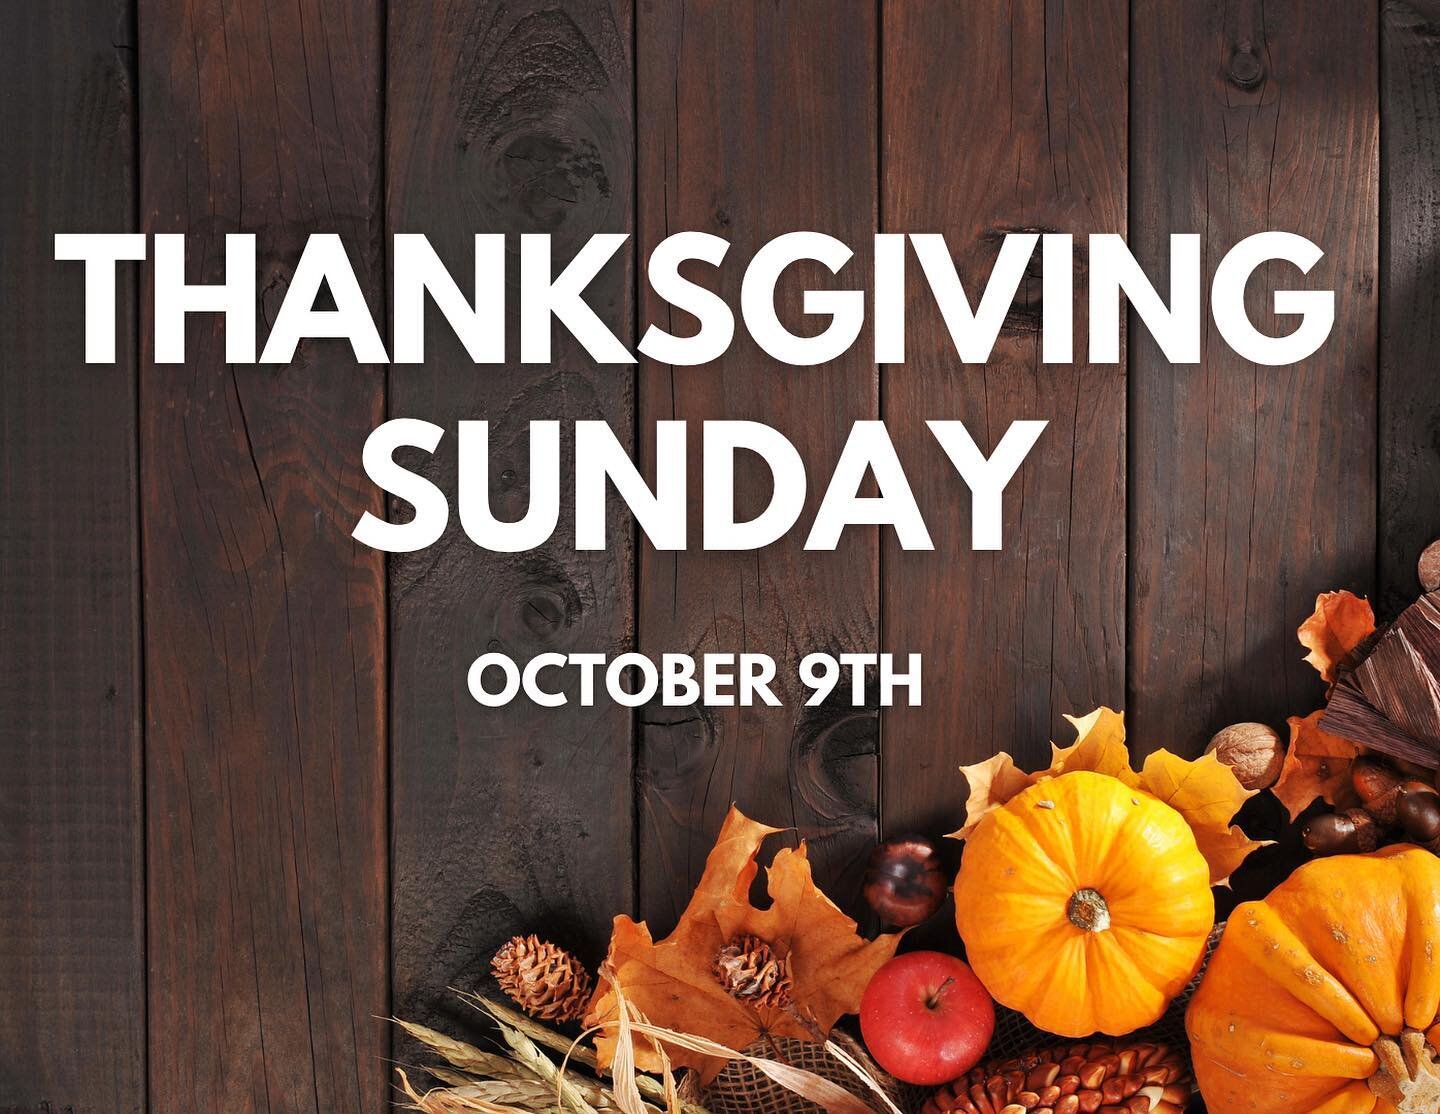 Thanksgiving Sunday Service!

If you missed this morning&rsquo;s service, you can still bring your non-perishable food items this Tuesday night Bible Study. All donations will be collected and delivered to the community food bank on Wednesday.

Remin